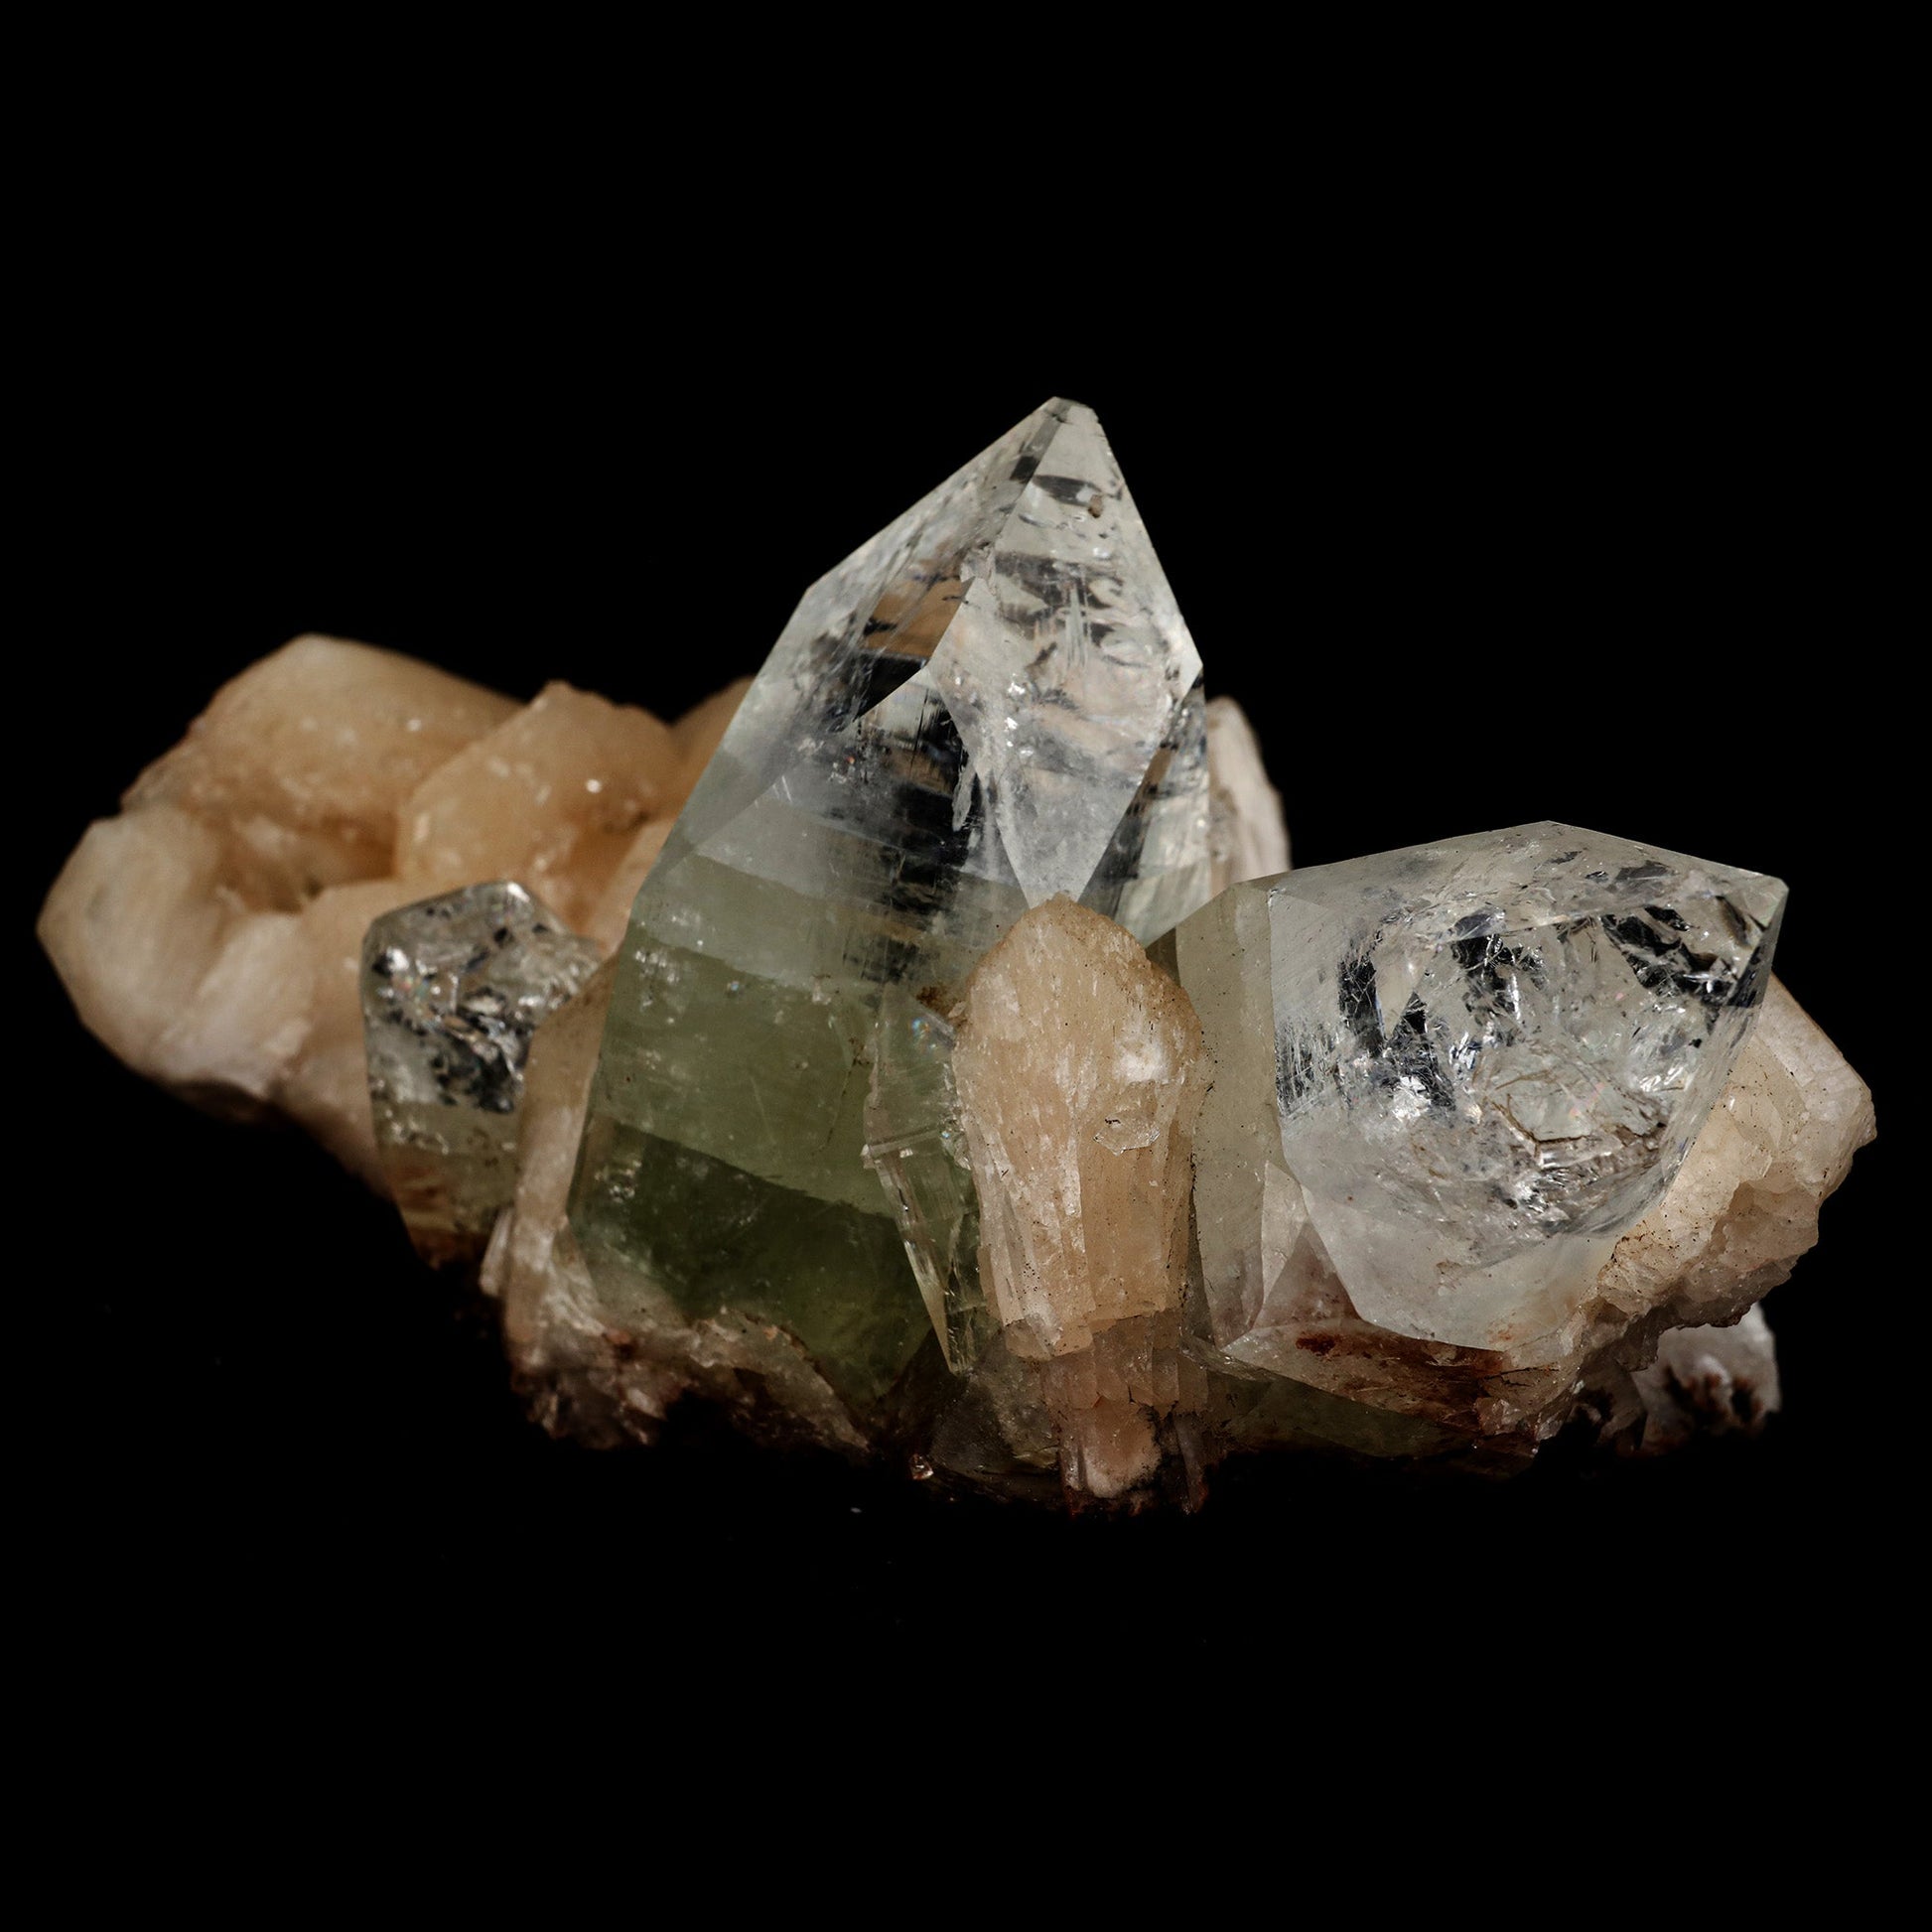 Bi- Colored Green Apophyllite with Stilbite Natural Mineral Specimen …  https://www.superbminerals.us/products/bi-colored-green-apophyllite-with-stilbite-natural-mineral-specimen-b-5102  Features: Rich green, extremely glassy, transparent apophyllite crystals from Jalgaon are arranged in a charming and aesthetically pleasing thumbnail spray. The spray is cleverly connected to iridescent stilbite blades, which add to the overall effect. The apophyllites are almost completely free of contamination.